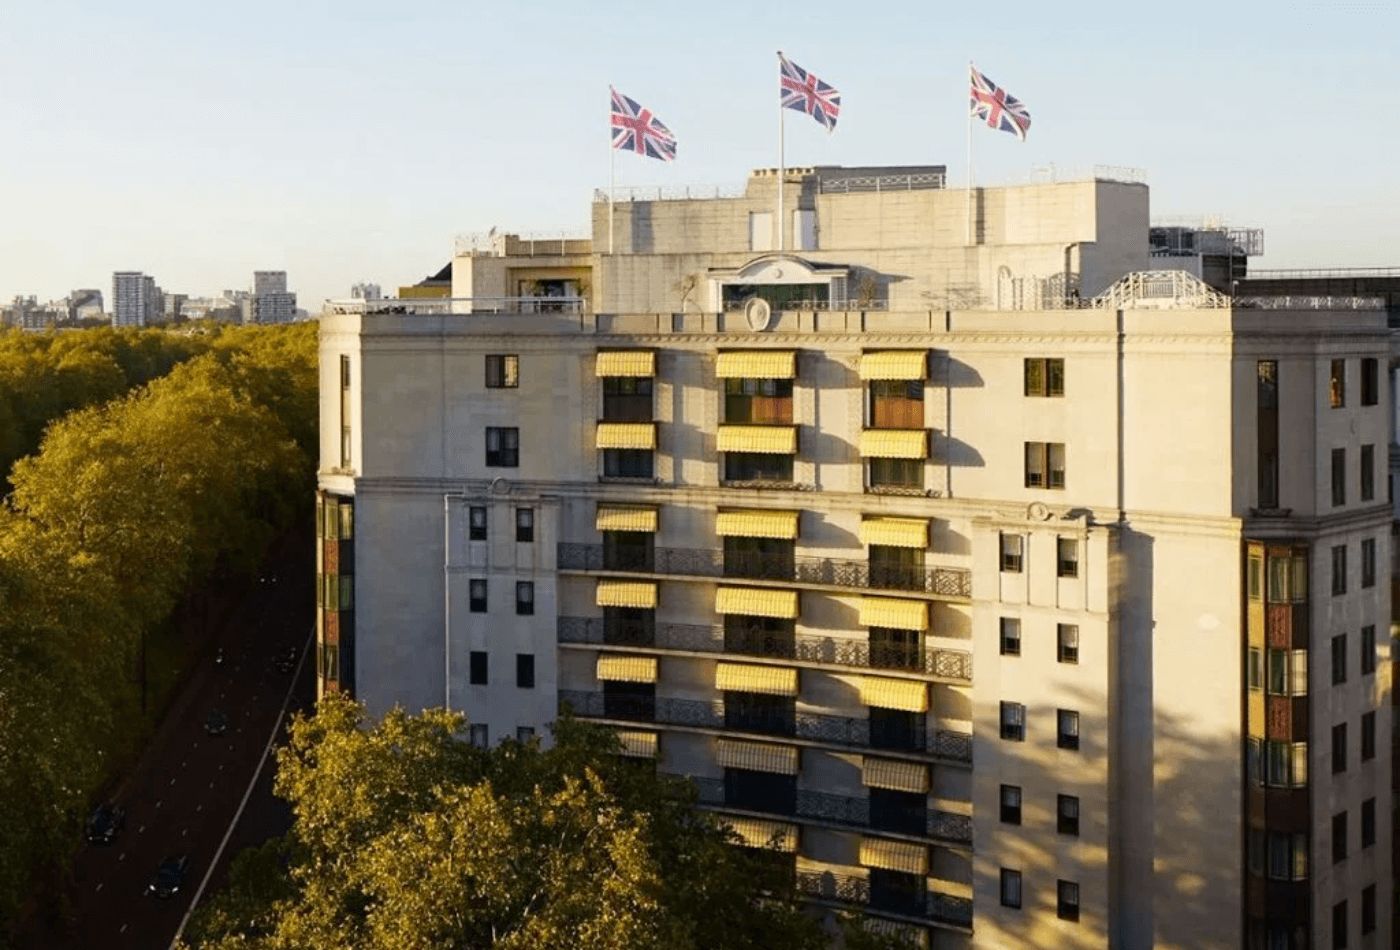 Large concrete hotel overlooking trees in the sunshine with a GB flag.jpg